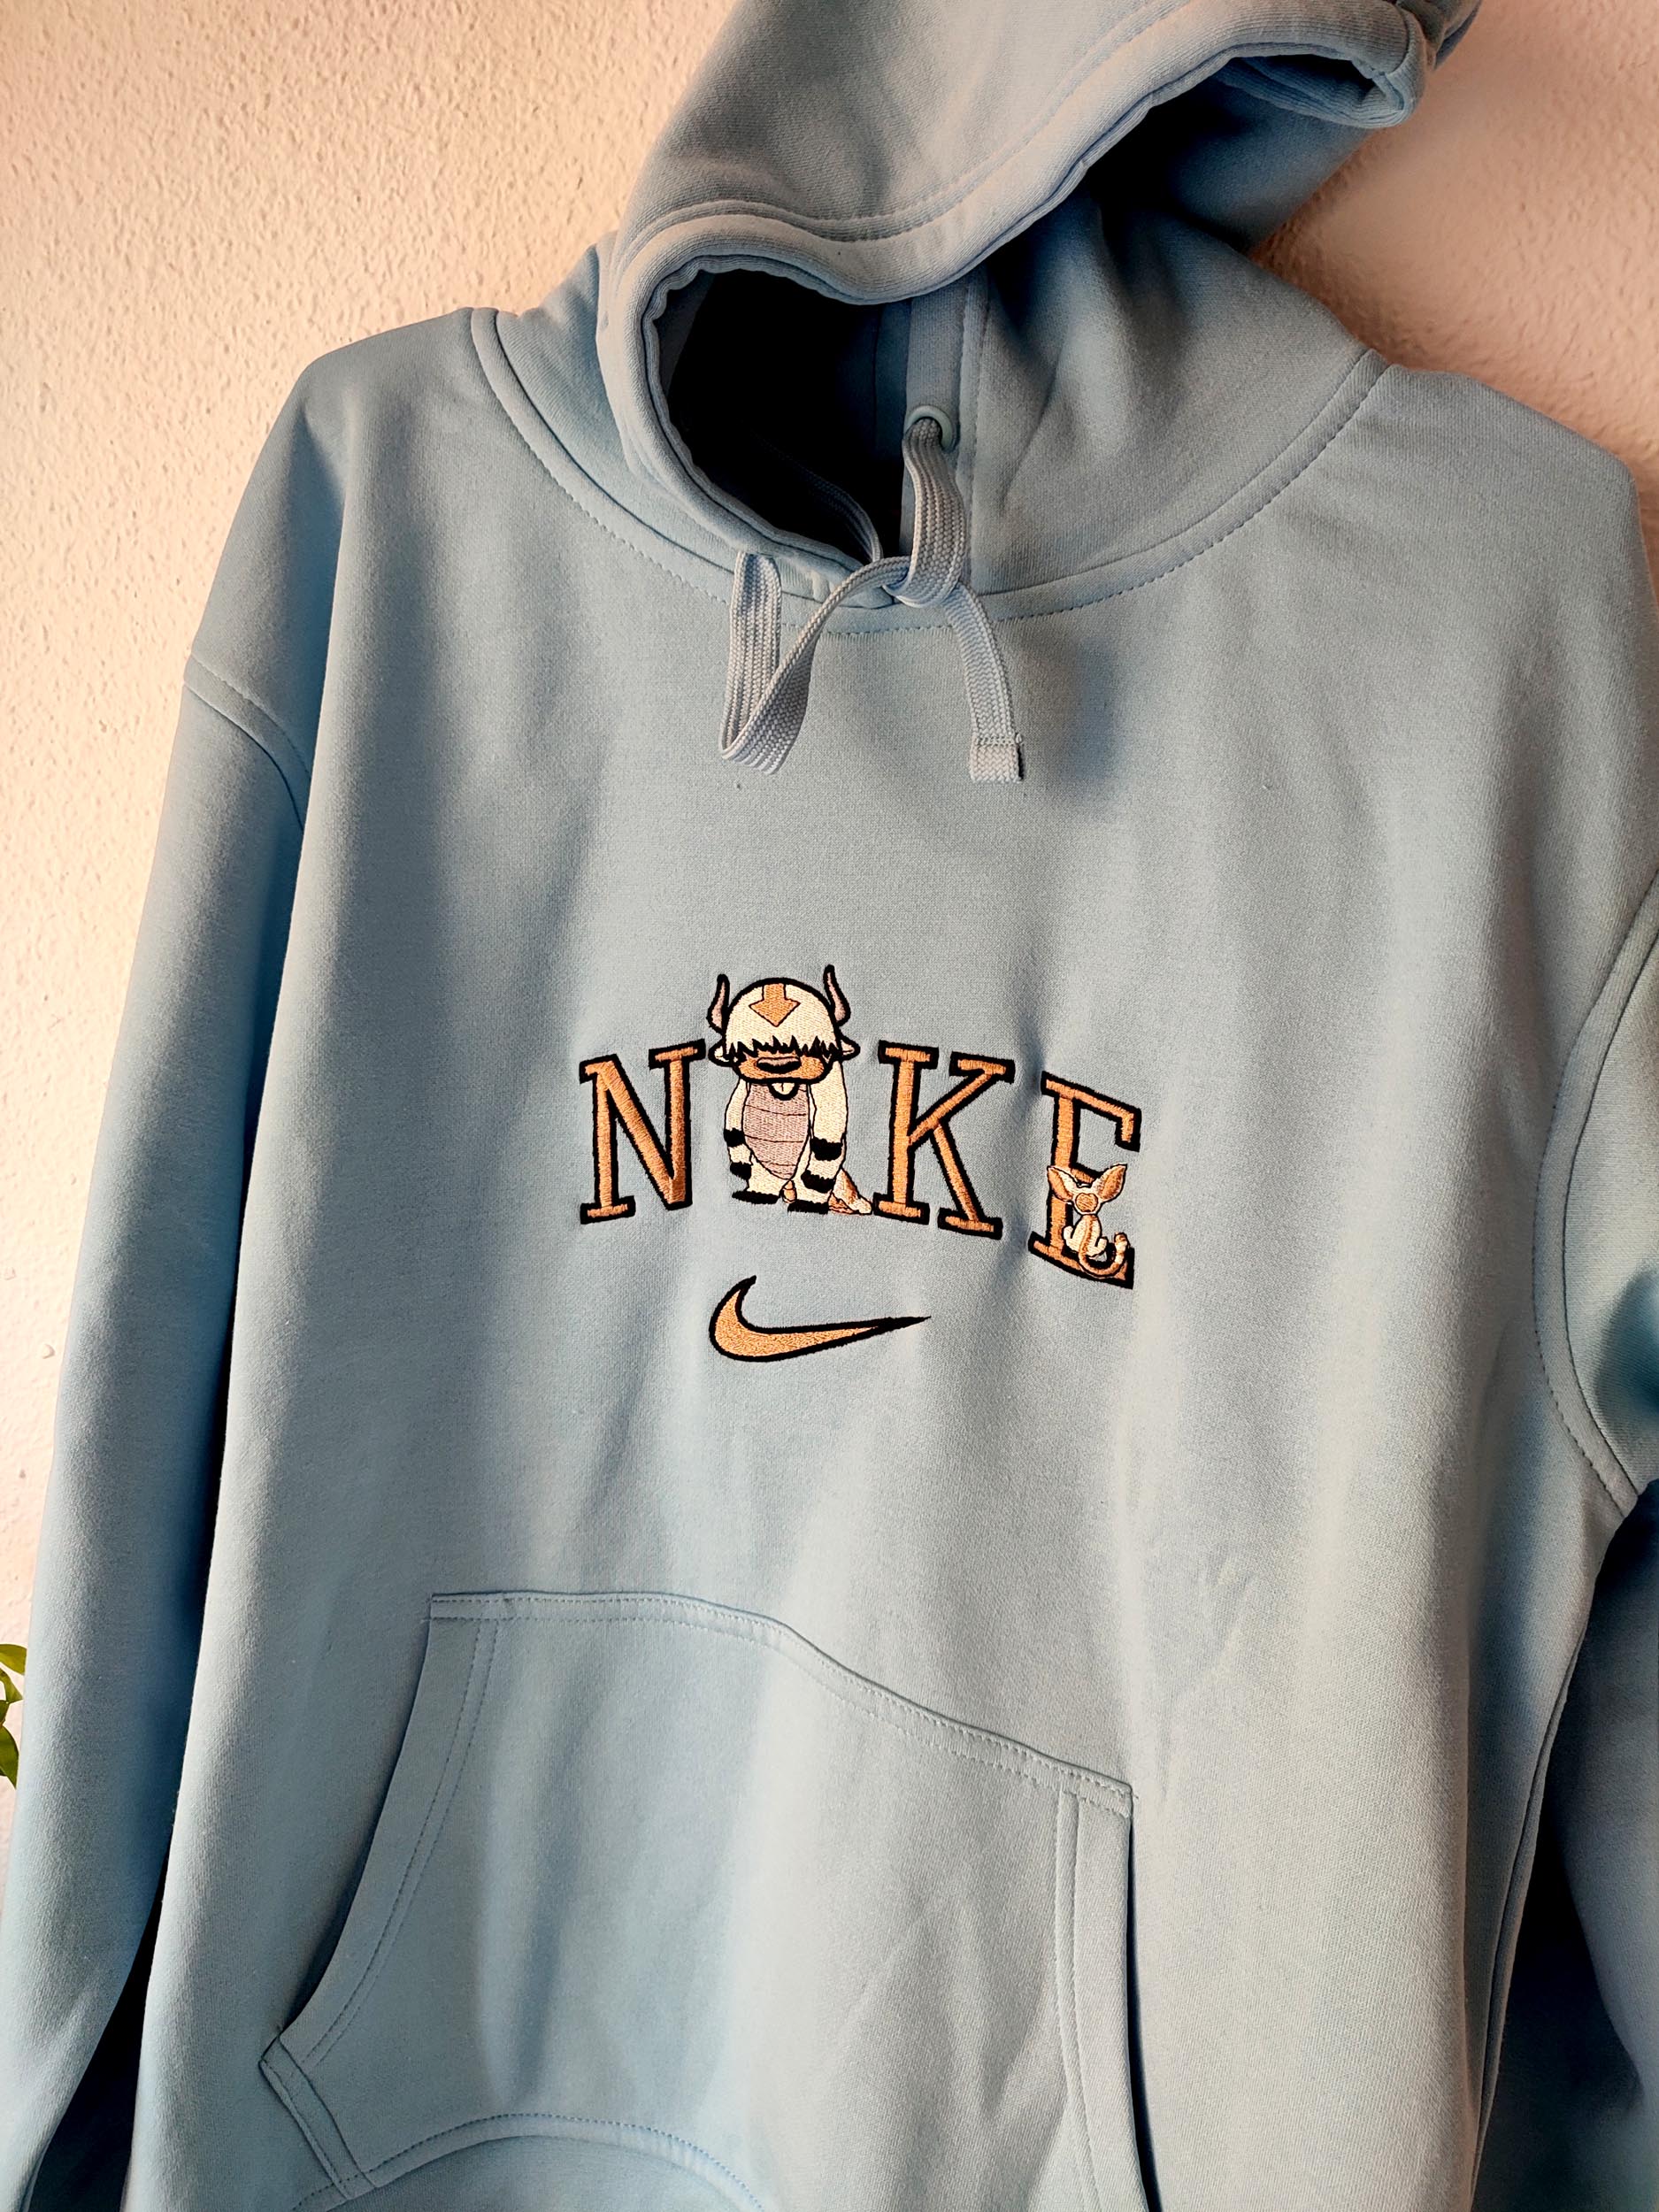 Namikaze Minato Nike Embroidered Shirt Nike Inspired Embroidered Sweatshirt  Anime Embroidered Hoodie Small Gifts Great Love  lupongovph